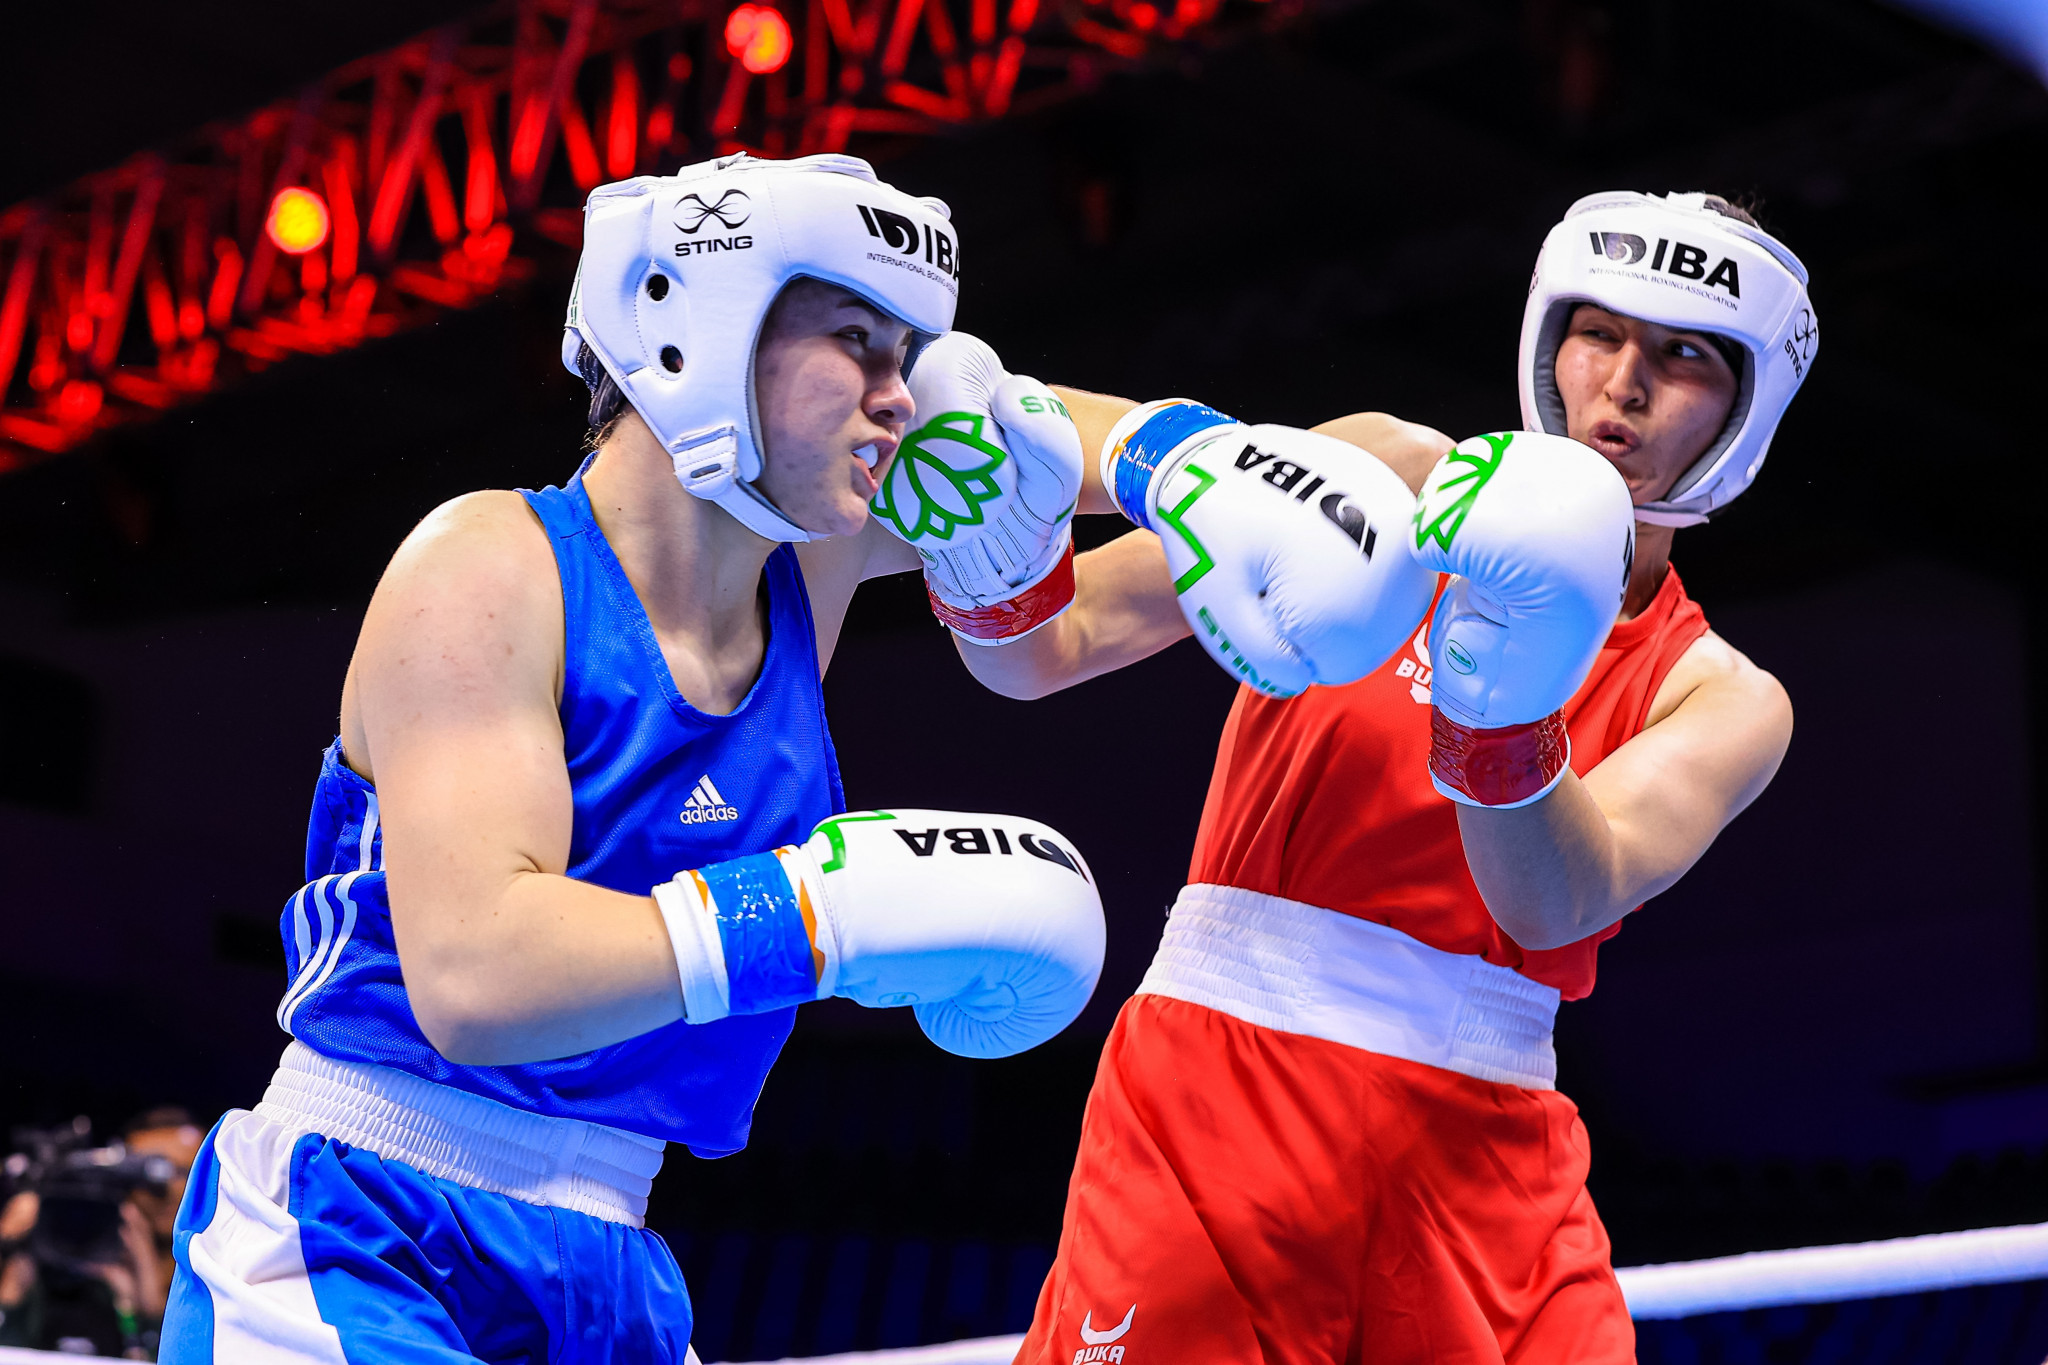 Megan de Cler, left, of The Netherlands competed under an IBA flag at New Delhi 2023 despite the Dutch Boxing Federation's withdrawal ©ITG